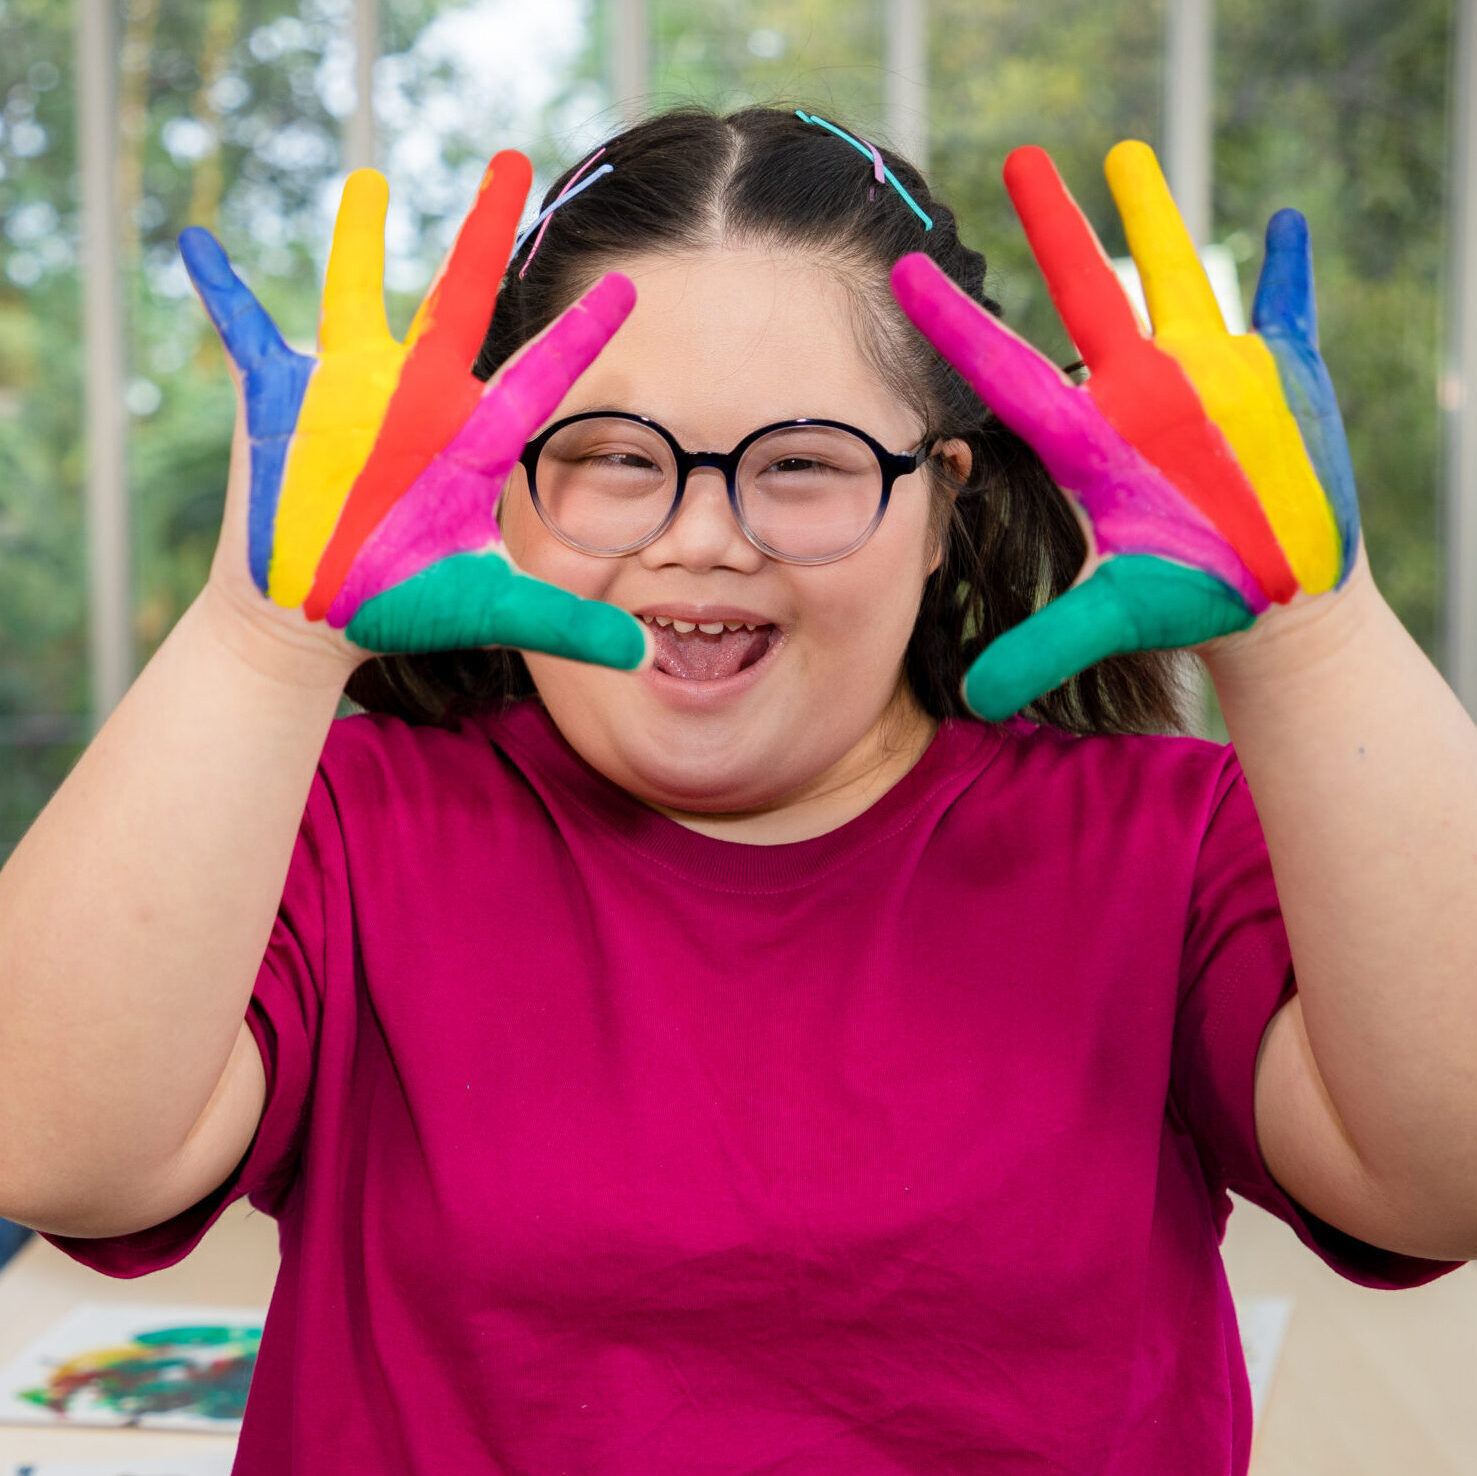 young girl with down syndrome holding her hands up covered with paint